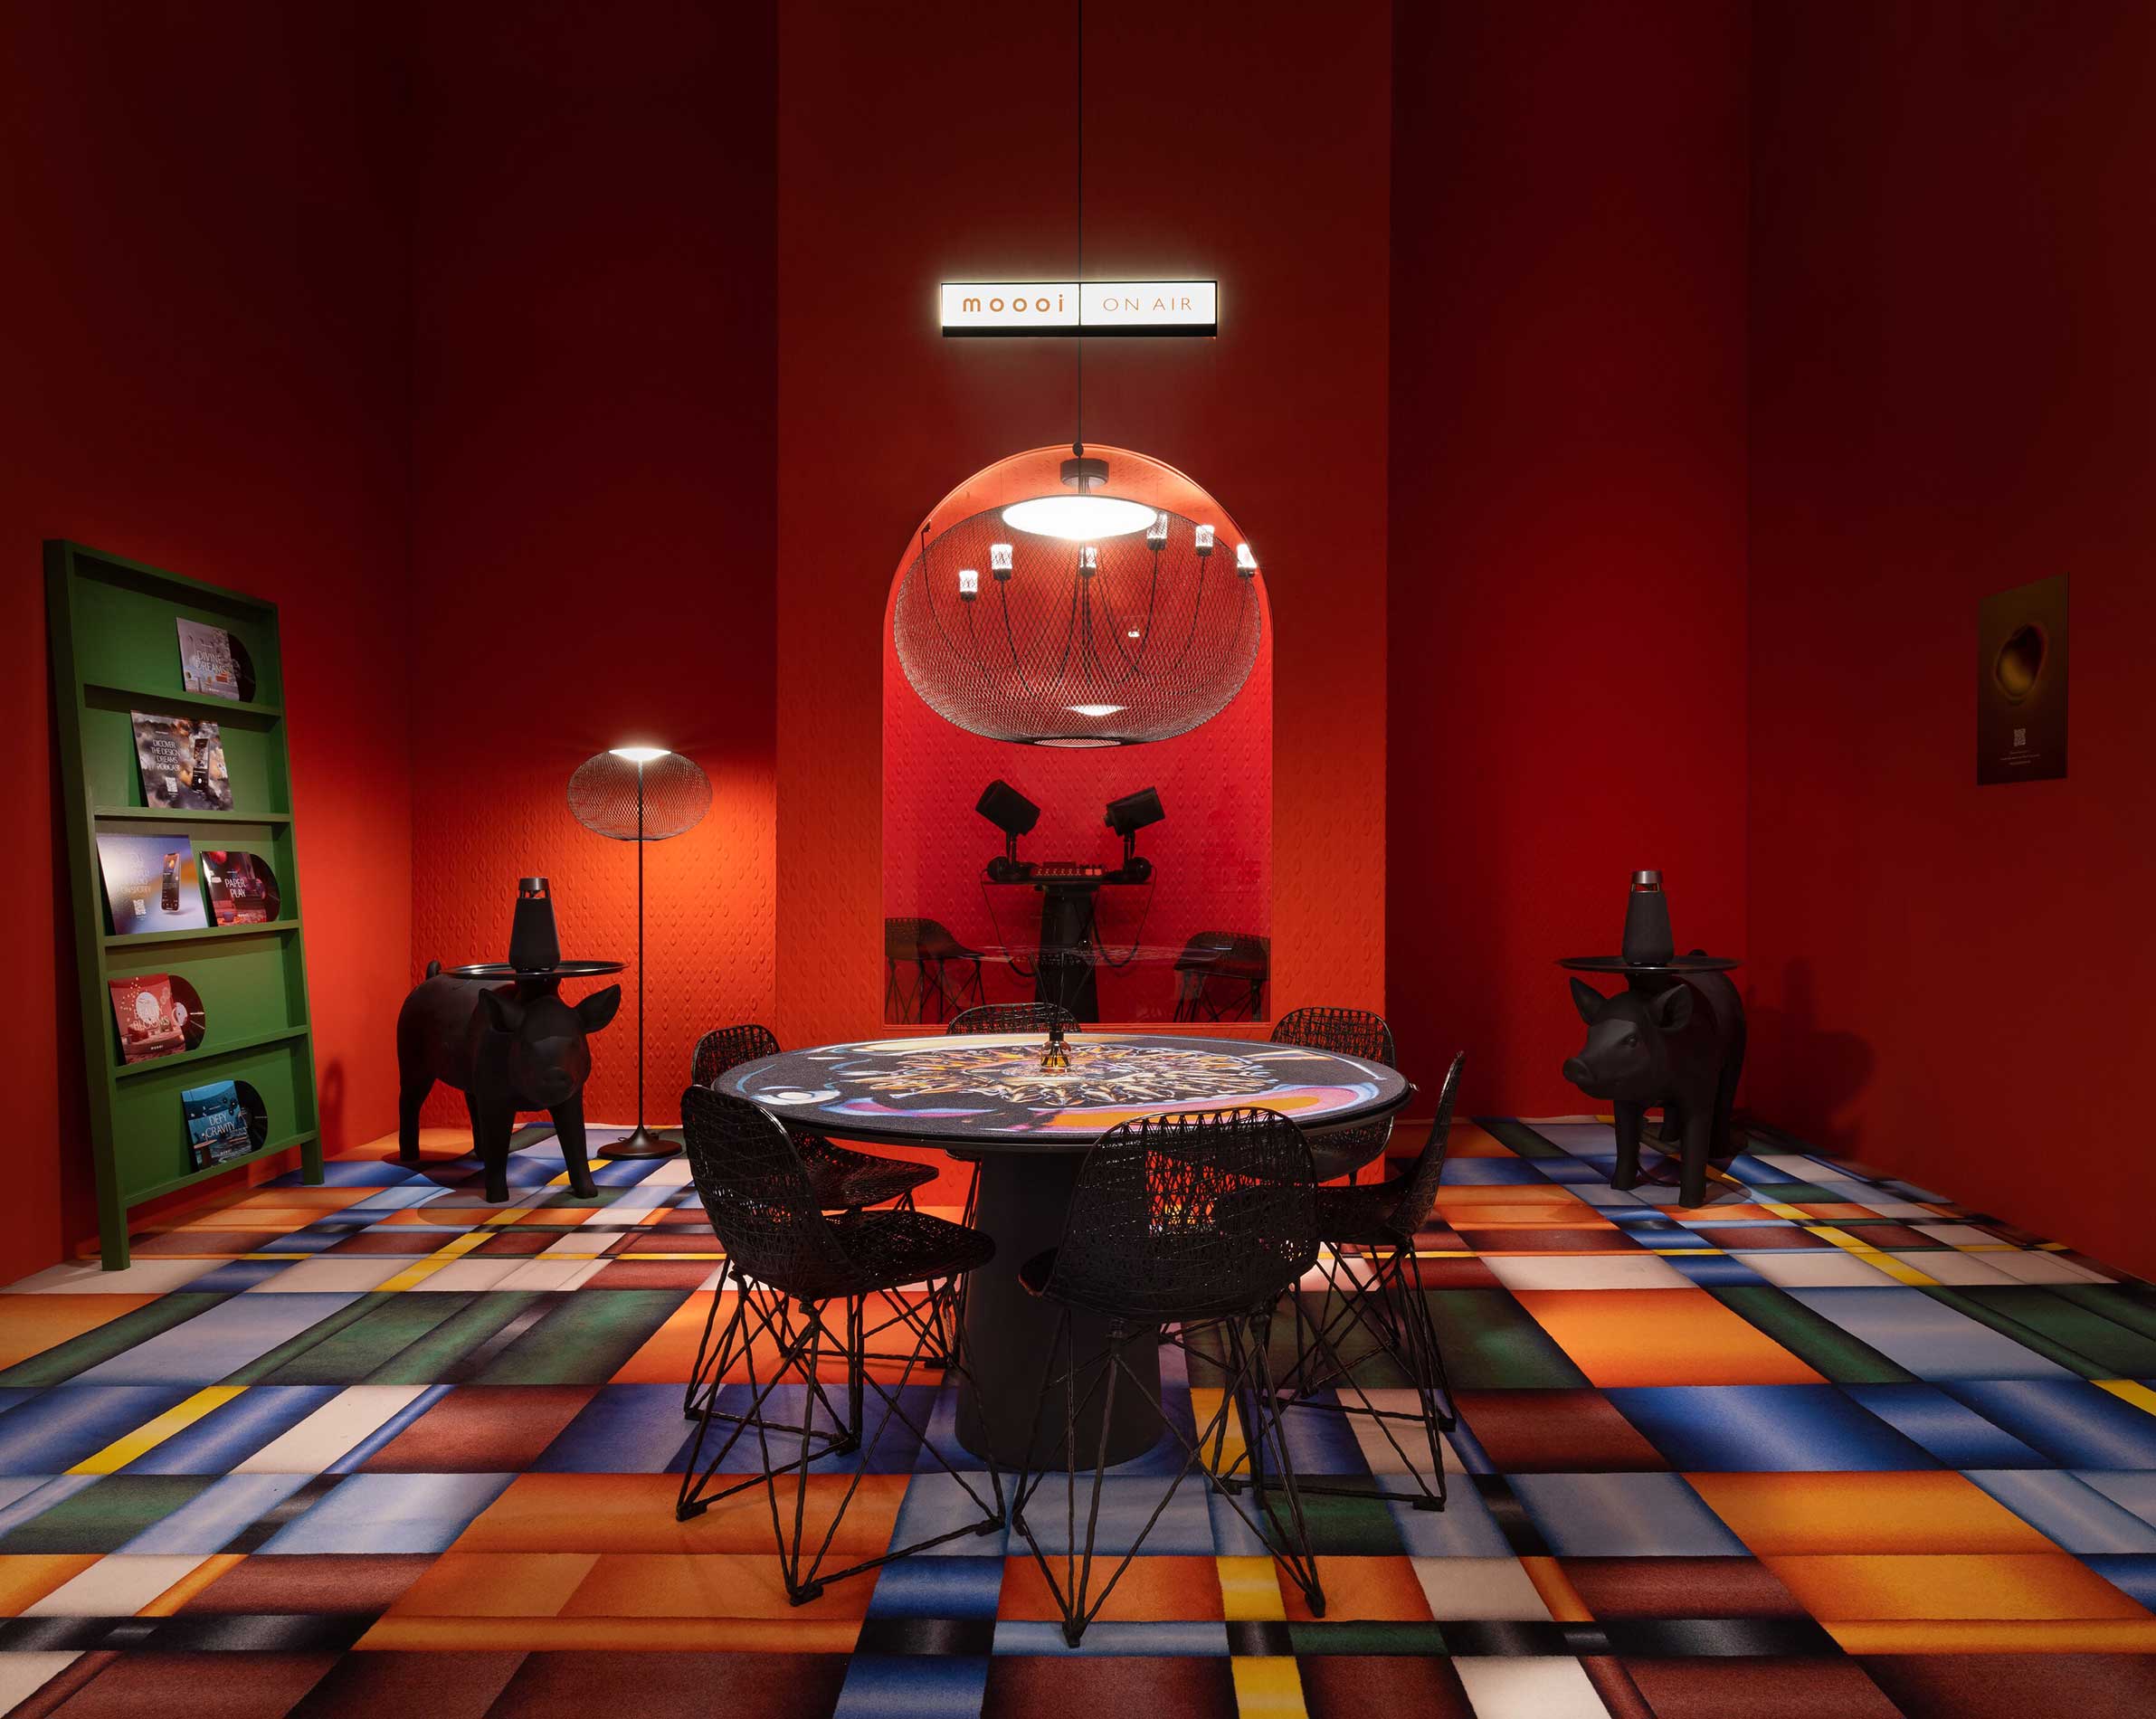 From the surreal to the achingly cool at Milan Design Week